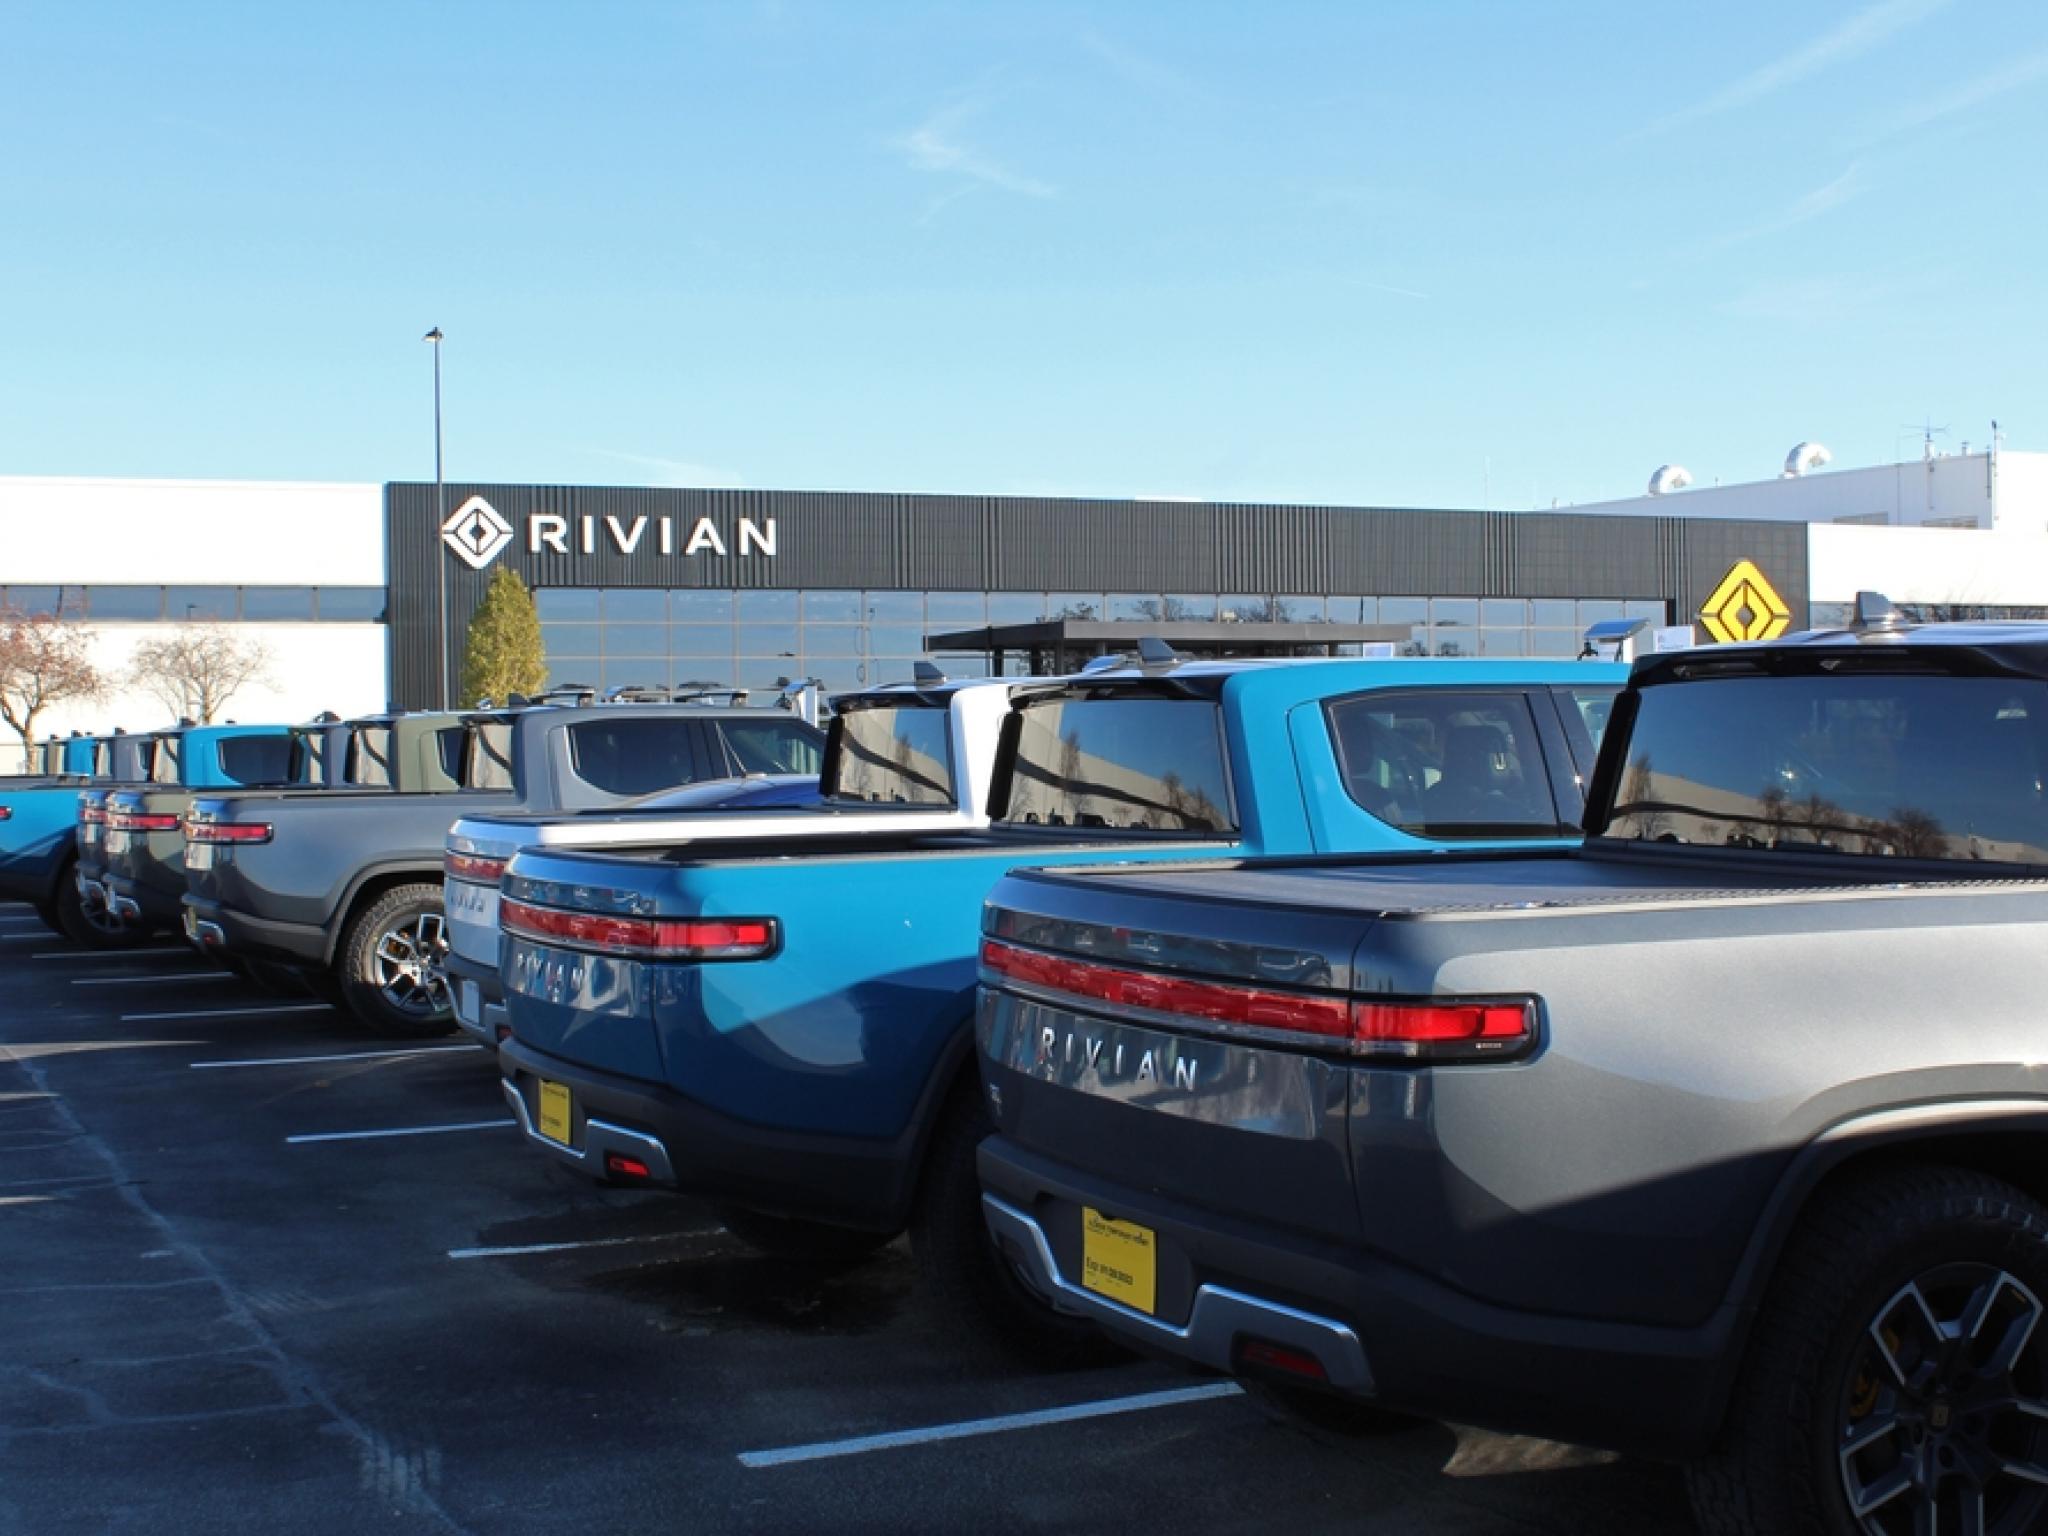  rivians-newest-dealership-in-texas-will-be-just-14-miles-from-teslas-gigafactory-google-data-shows 